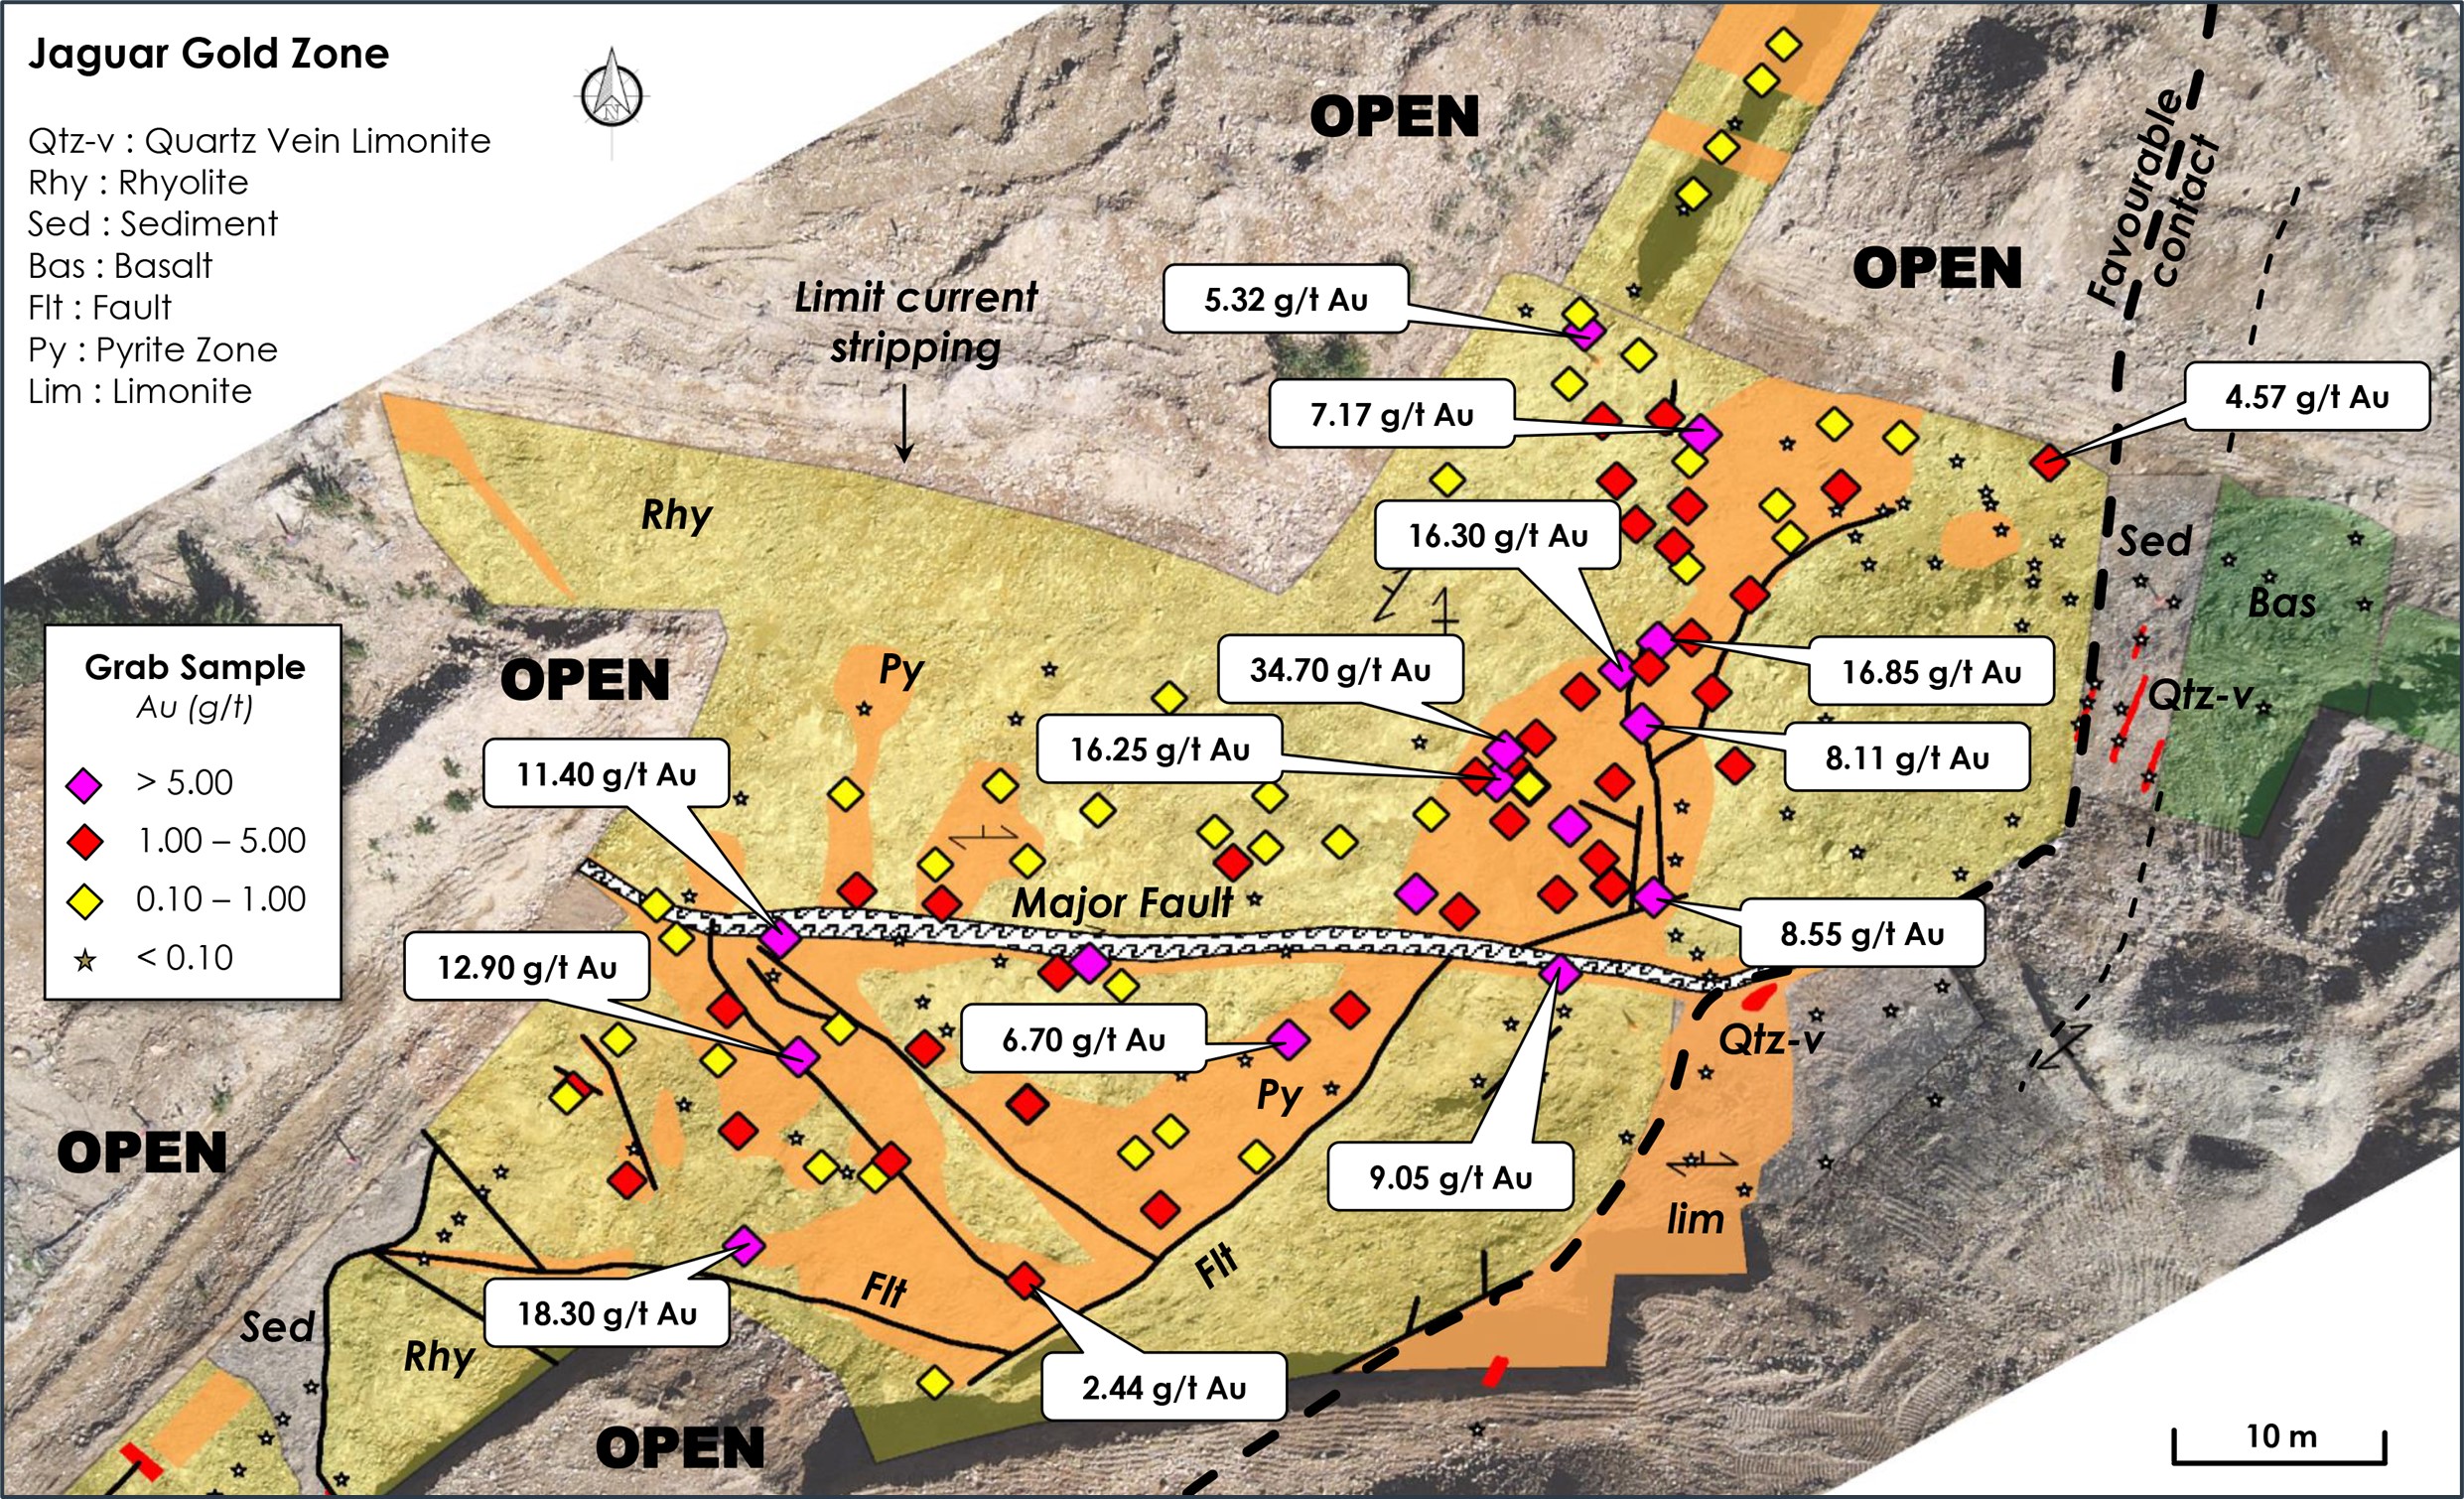 FIGURE 1: Location of grab samples at the Jaguar Gold Zone